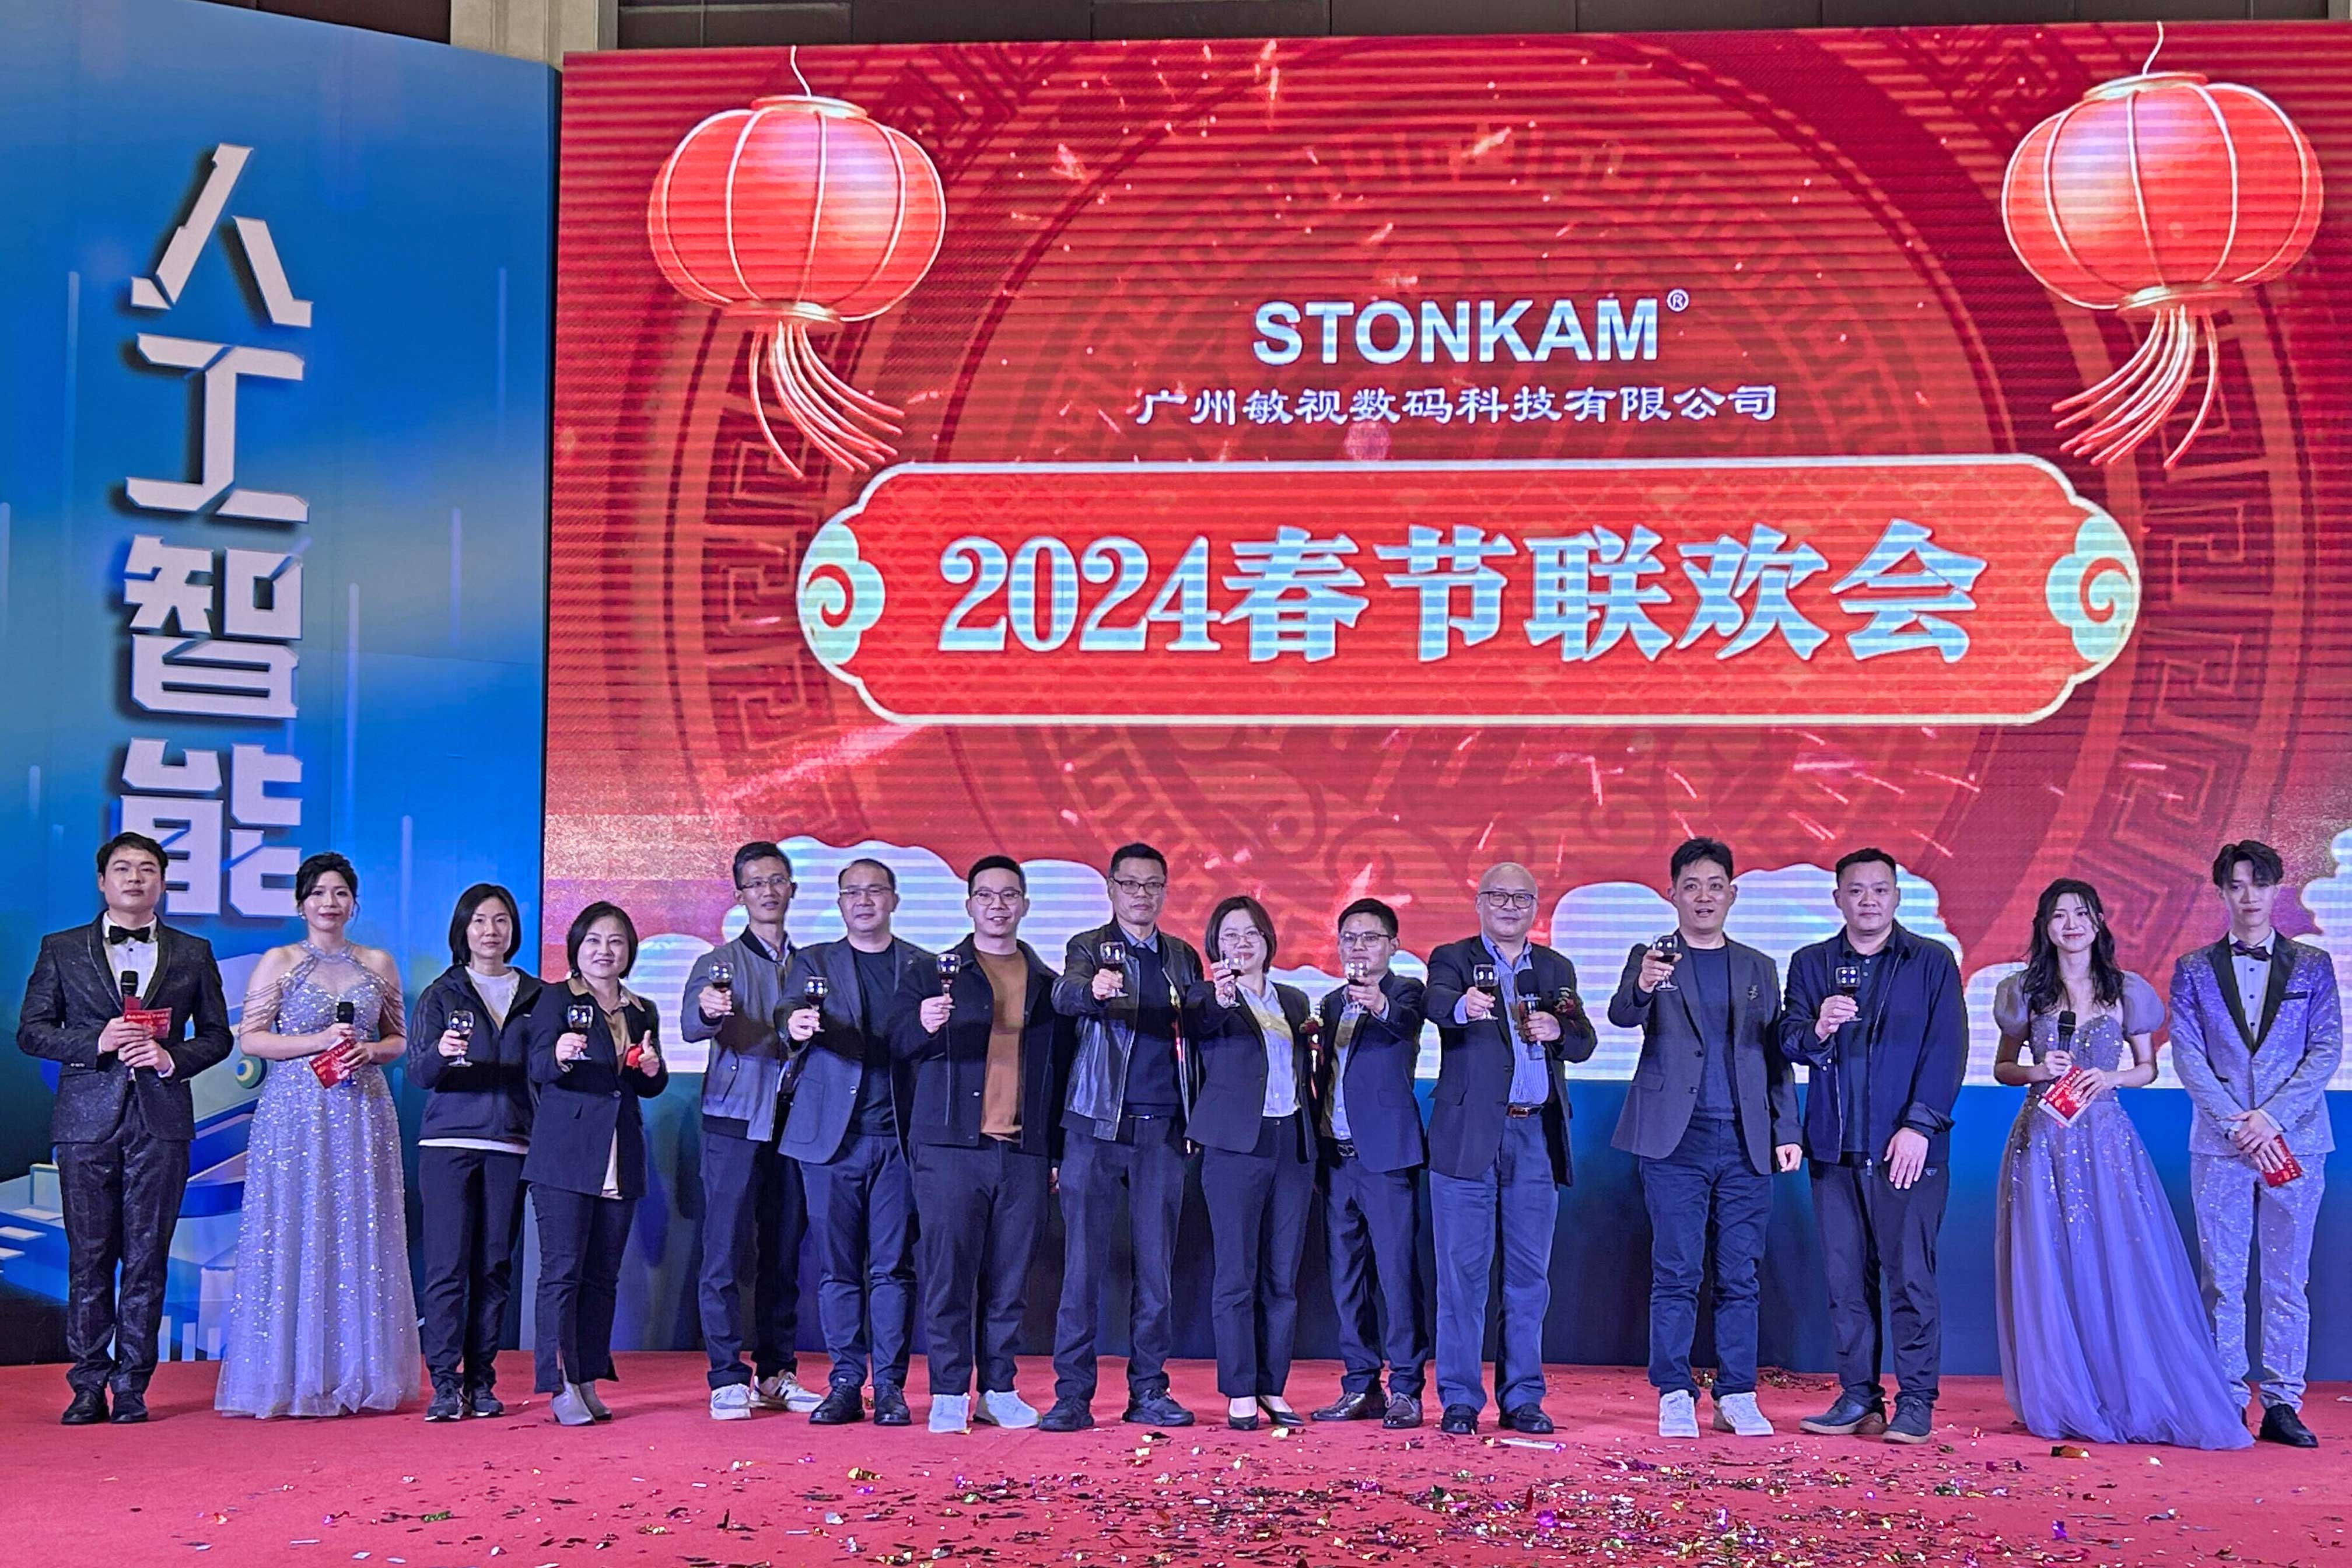 STONKAM 2023 Annual Conference and Chinese New Year Celebration